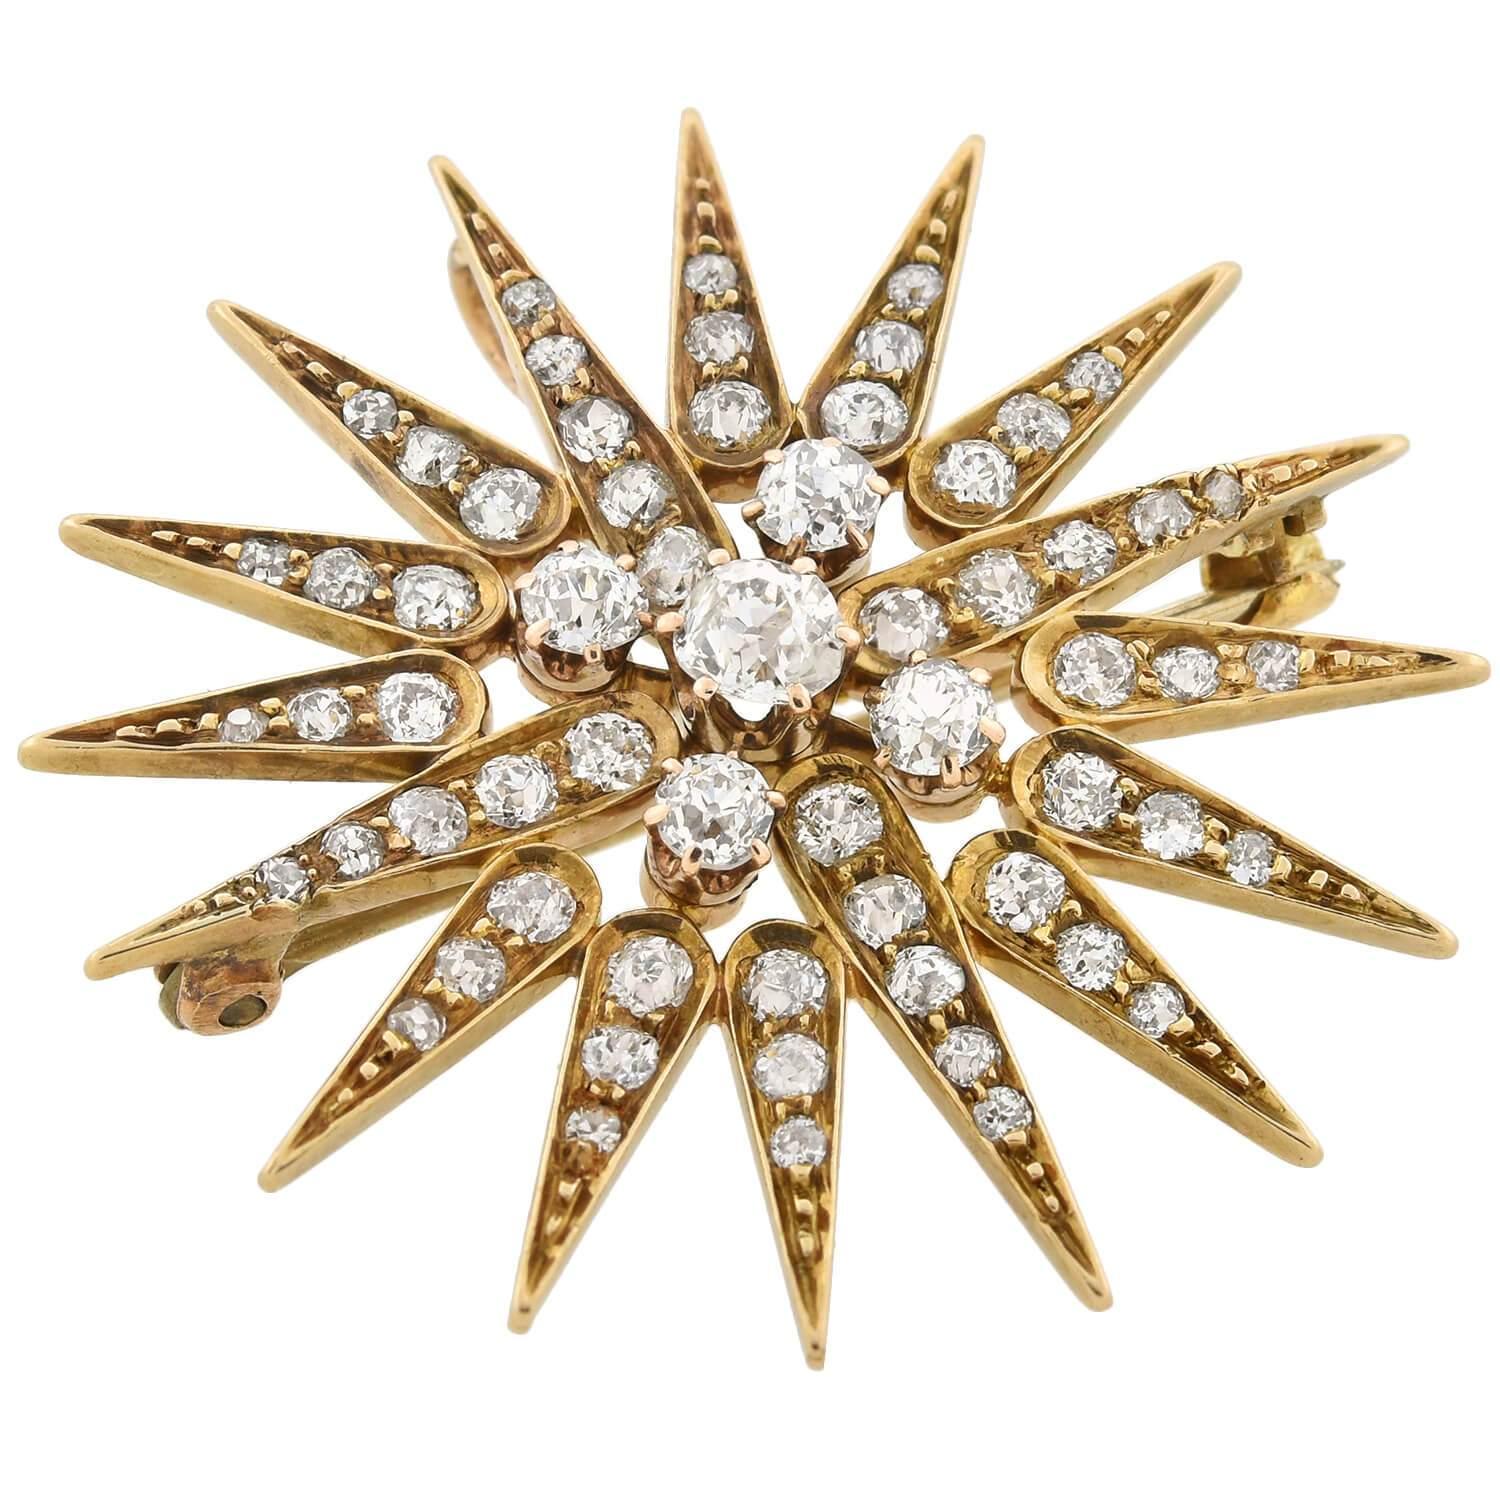 A spectacular diamond starburst pin/pendant from the Art Nouveau (ca1900s) era! This beautiful piece is crafted in 14kt yellow gold and comprised of 61 old Mine Cut diamonds which come together to form a sparkling celestial starburst. Five diamonds